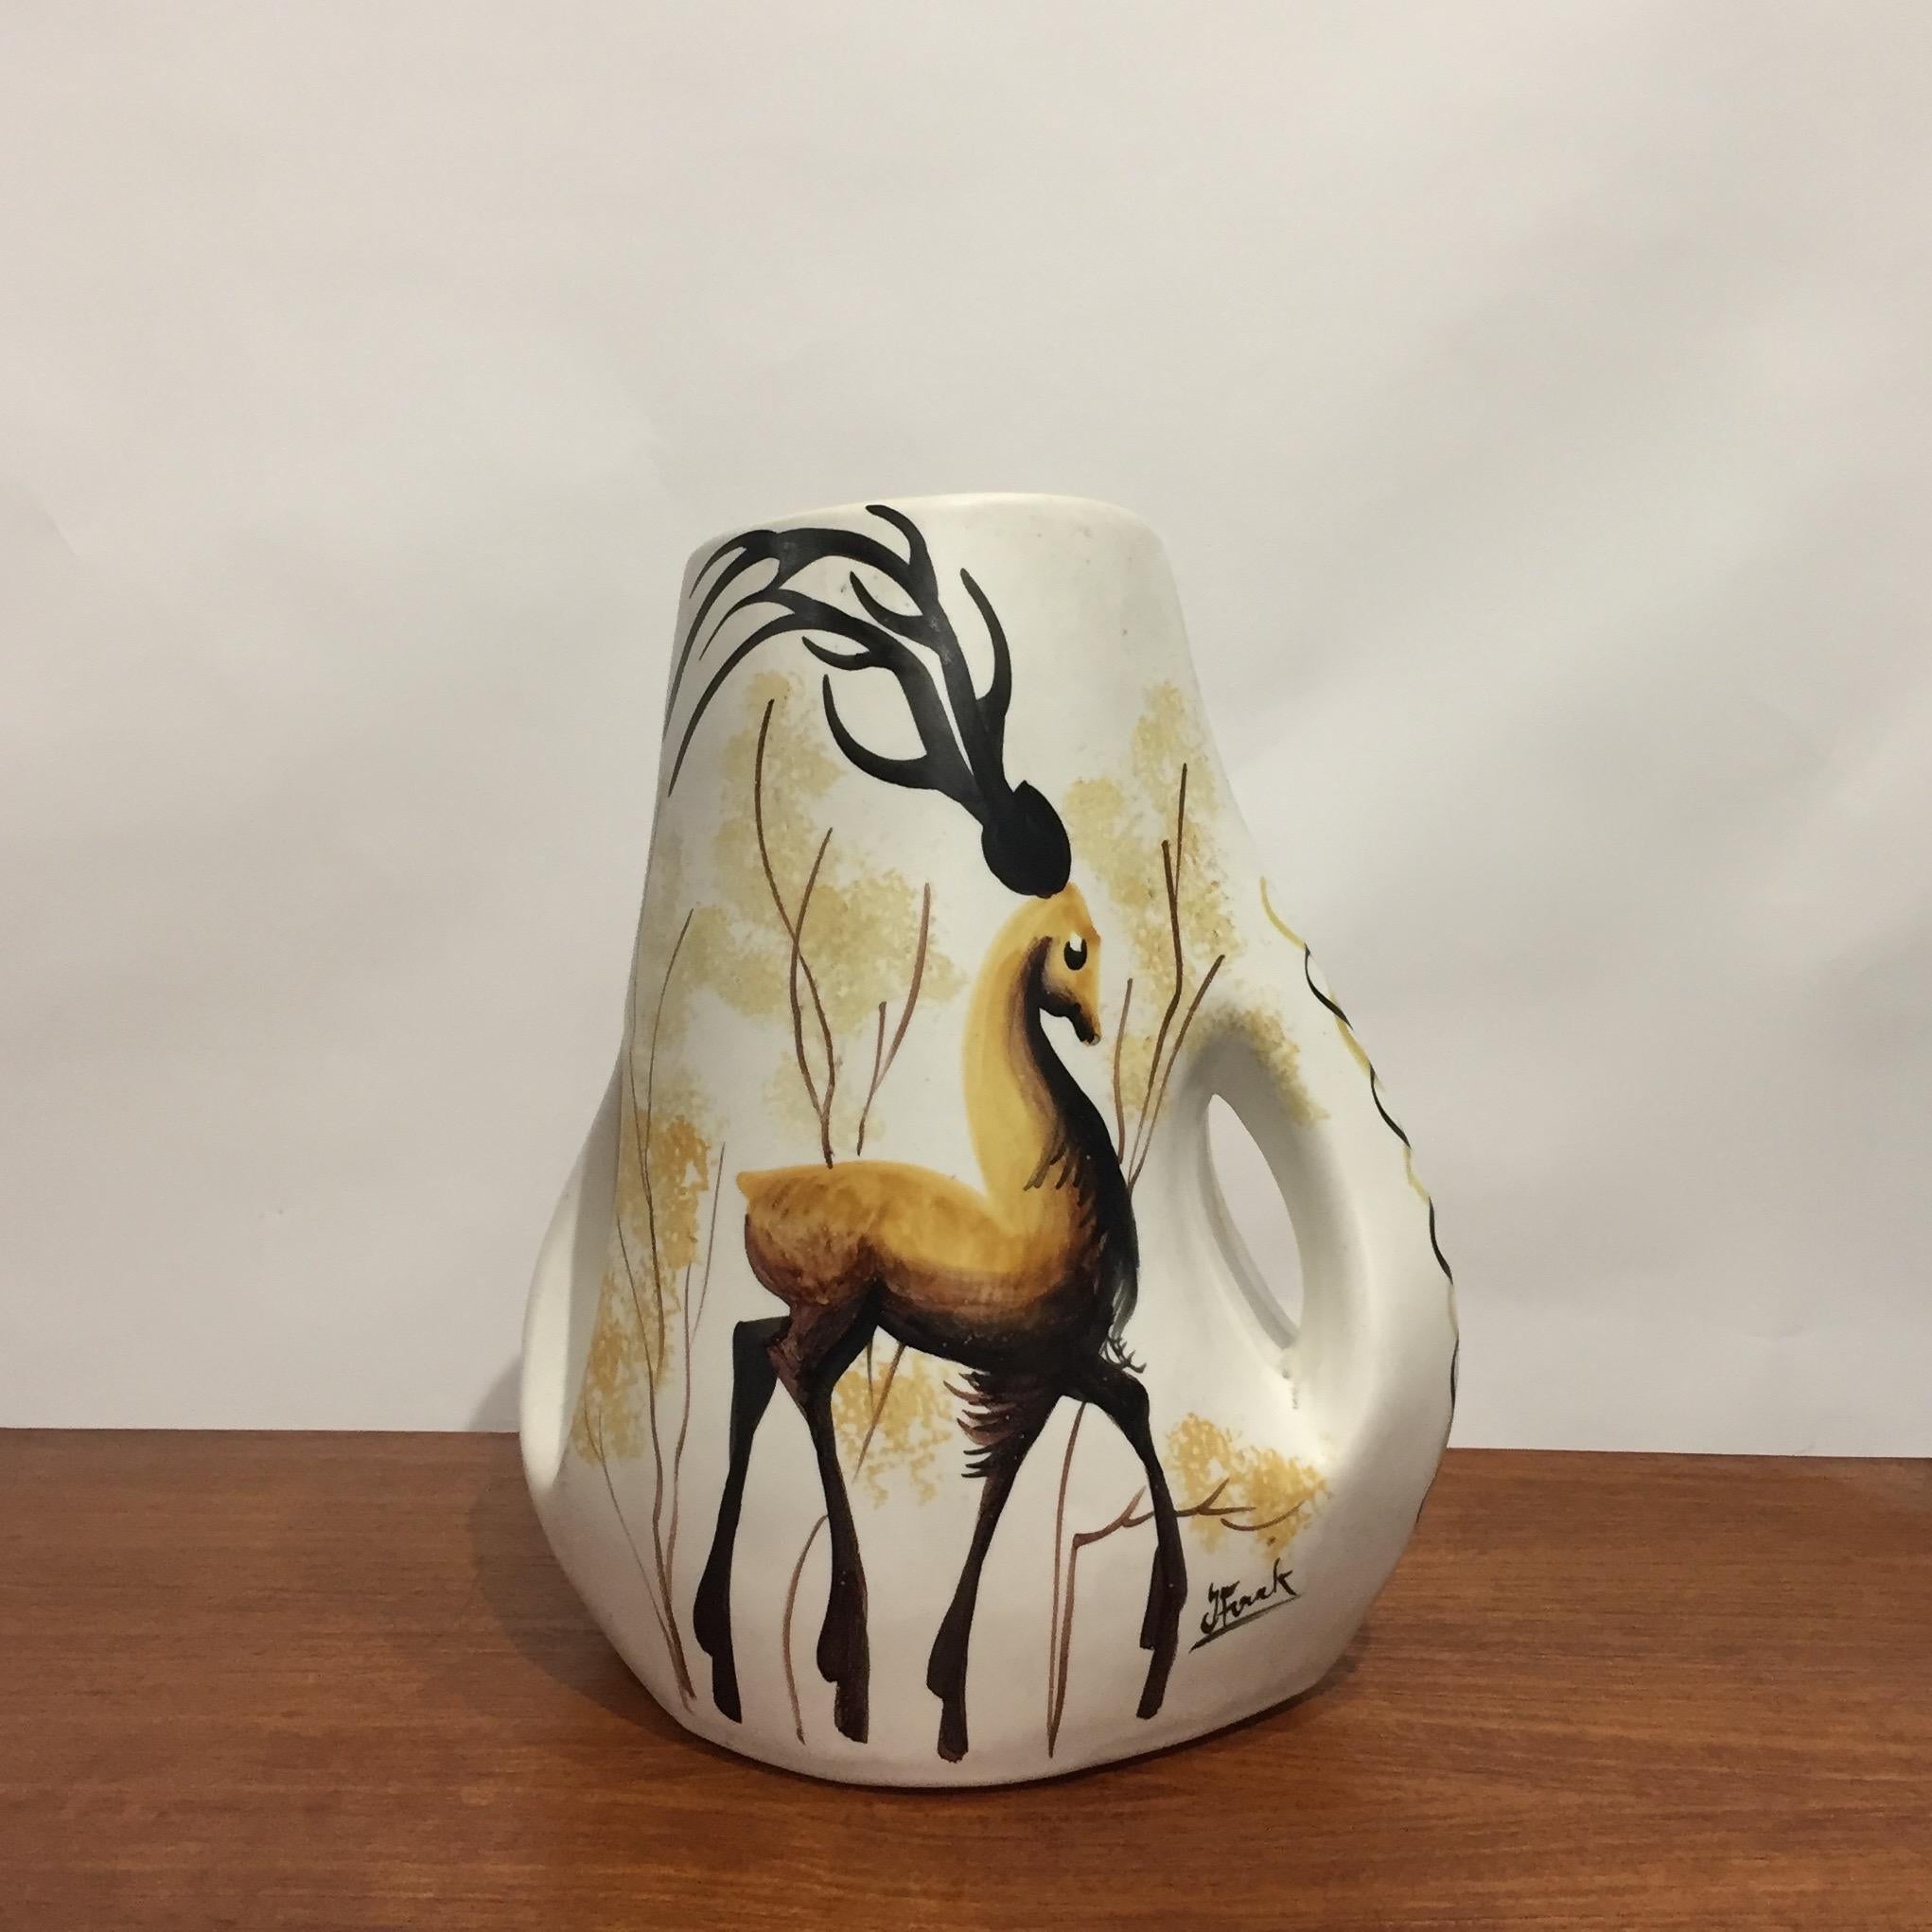 1960's French Vallauris ceramic vase.
White and Yellow with a painted deer decoration. 
Two large Handles. Signature of Vallauris under the base. 
Rare model with a beautiful quality of work.